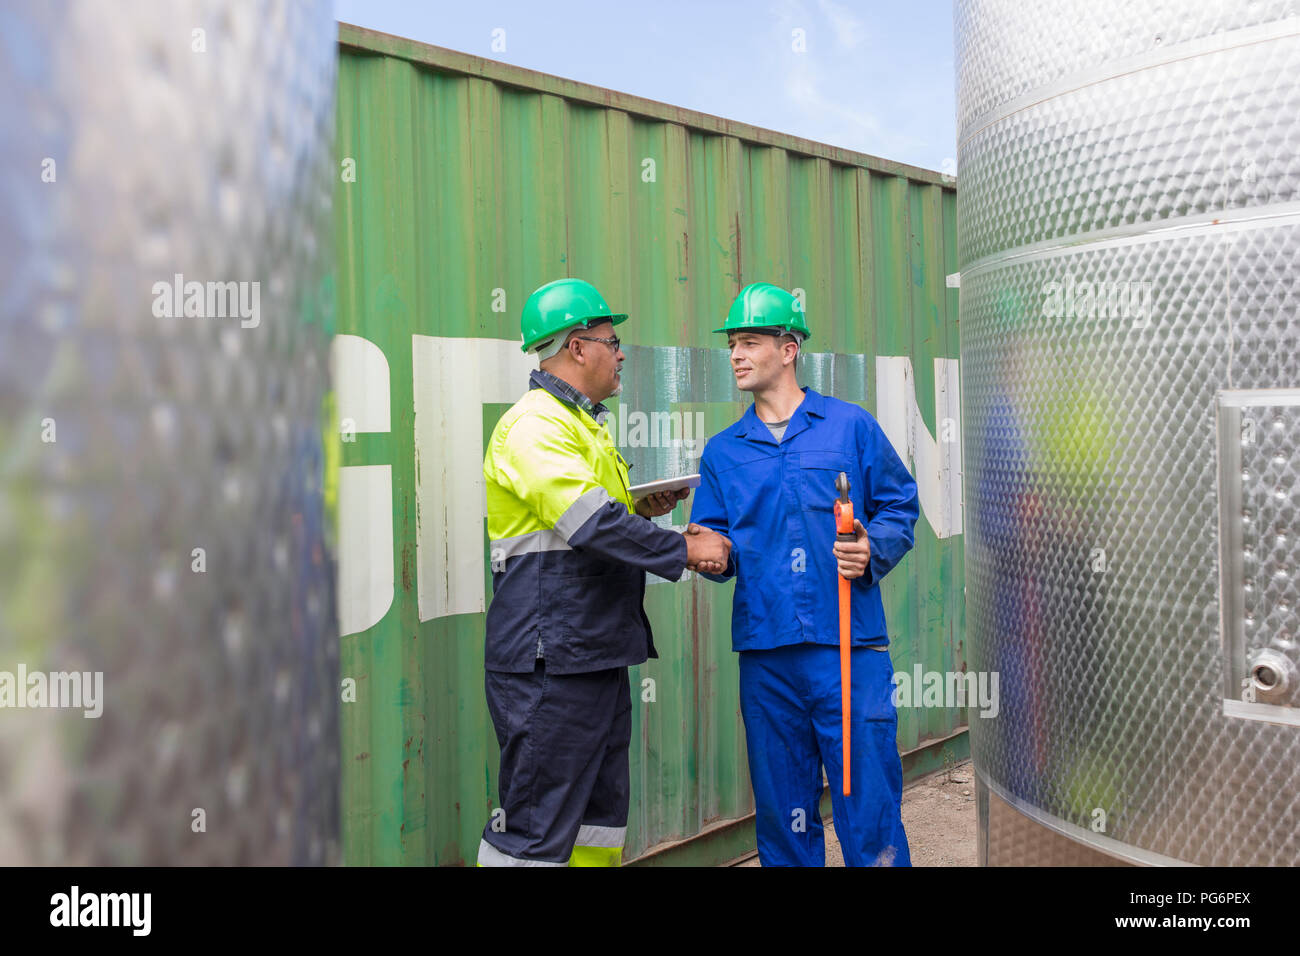 Two workers at container shaking hands Stock Photo